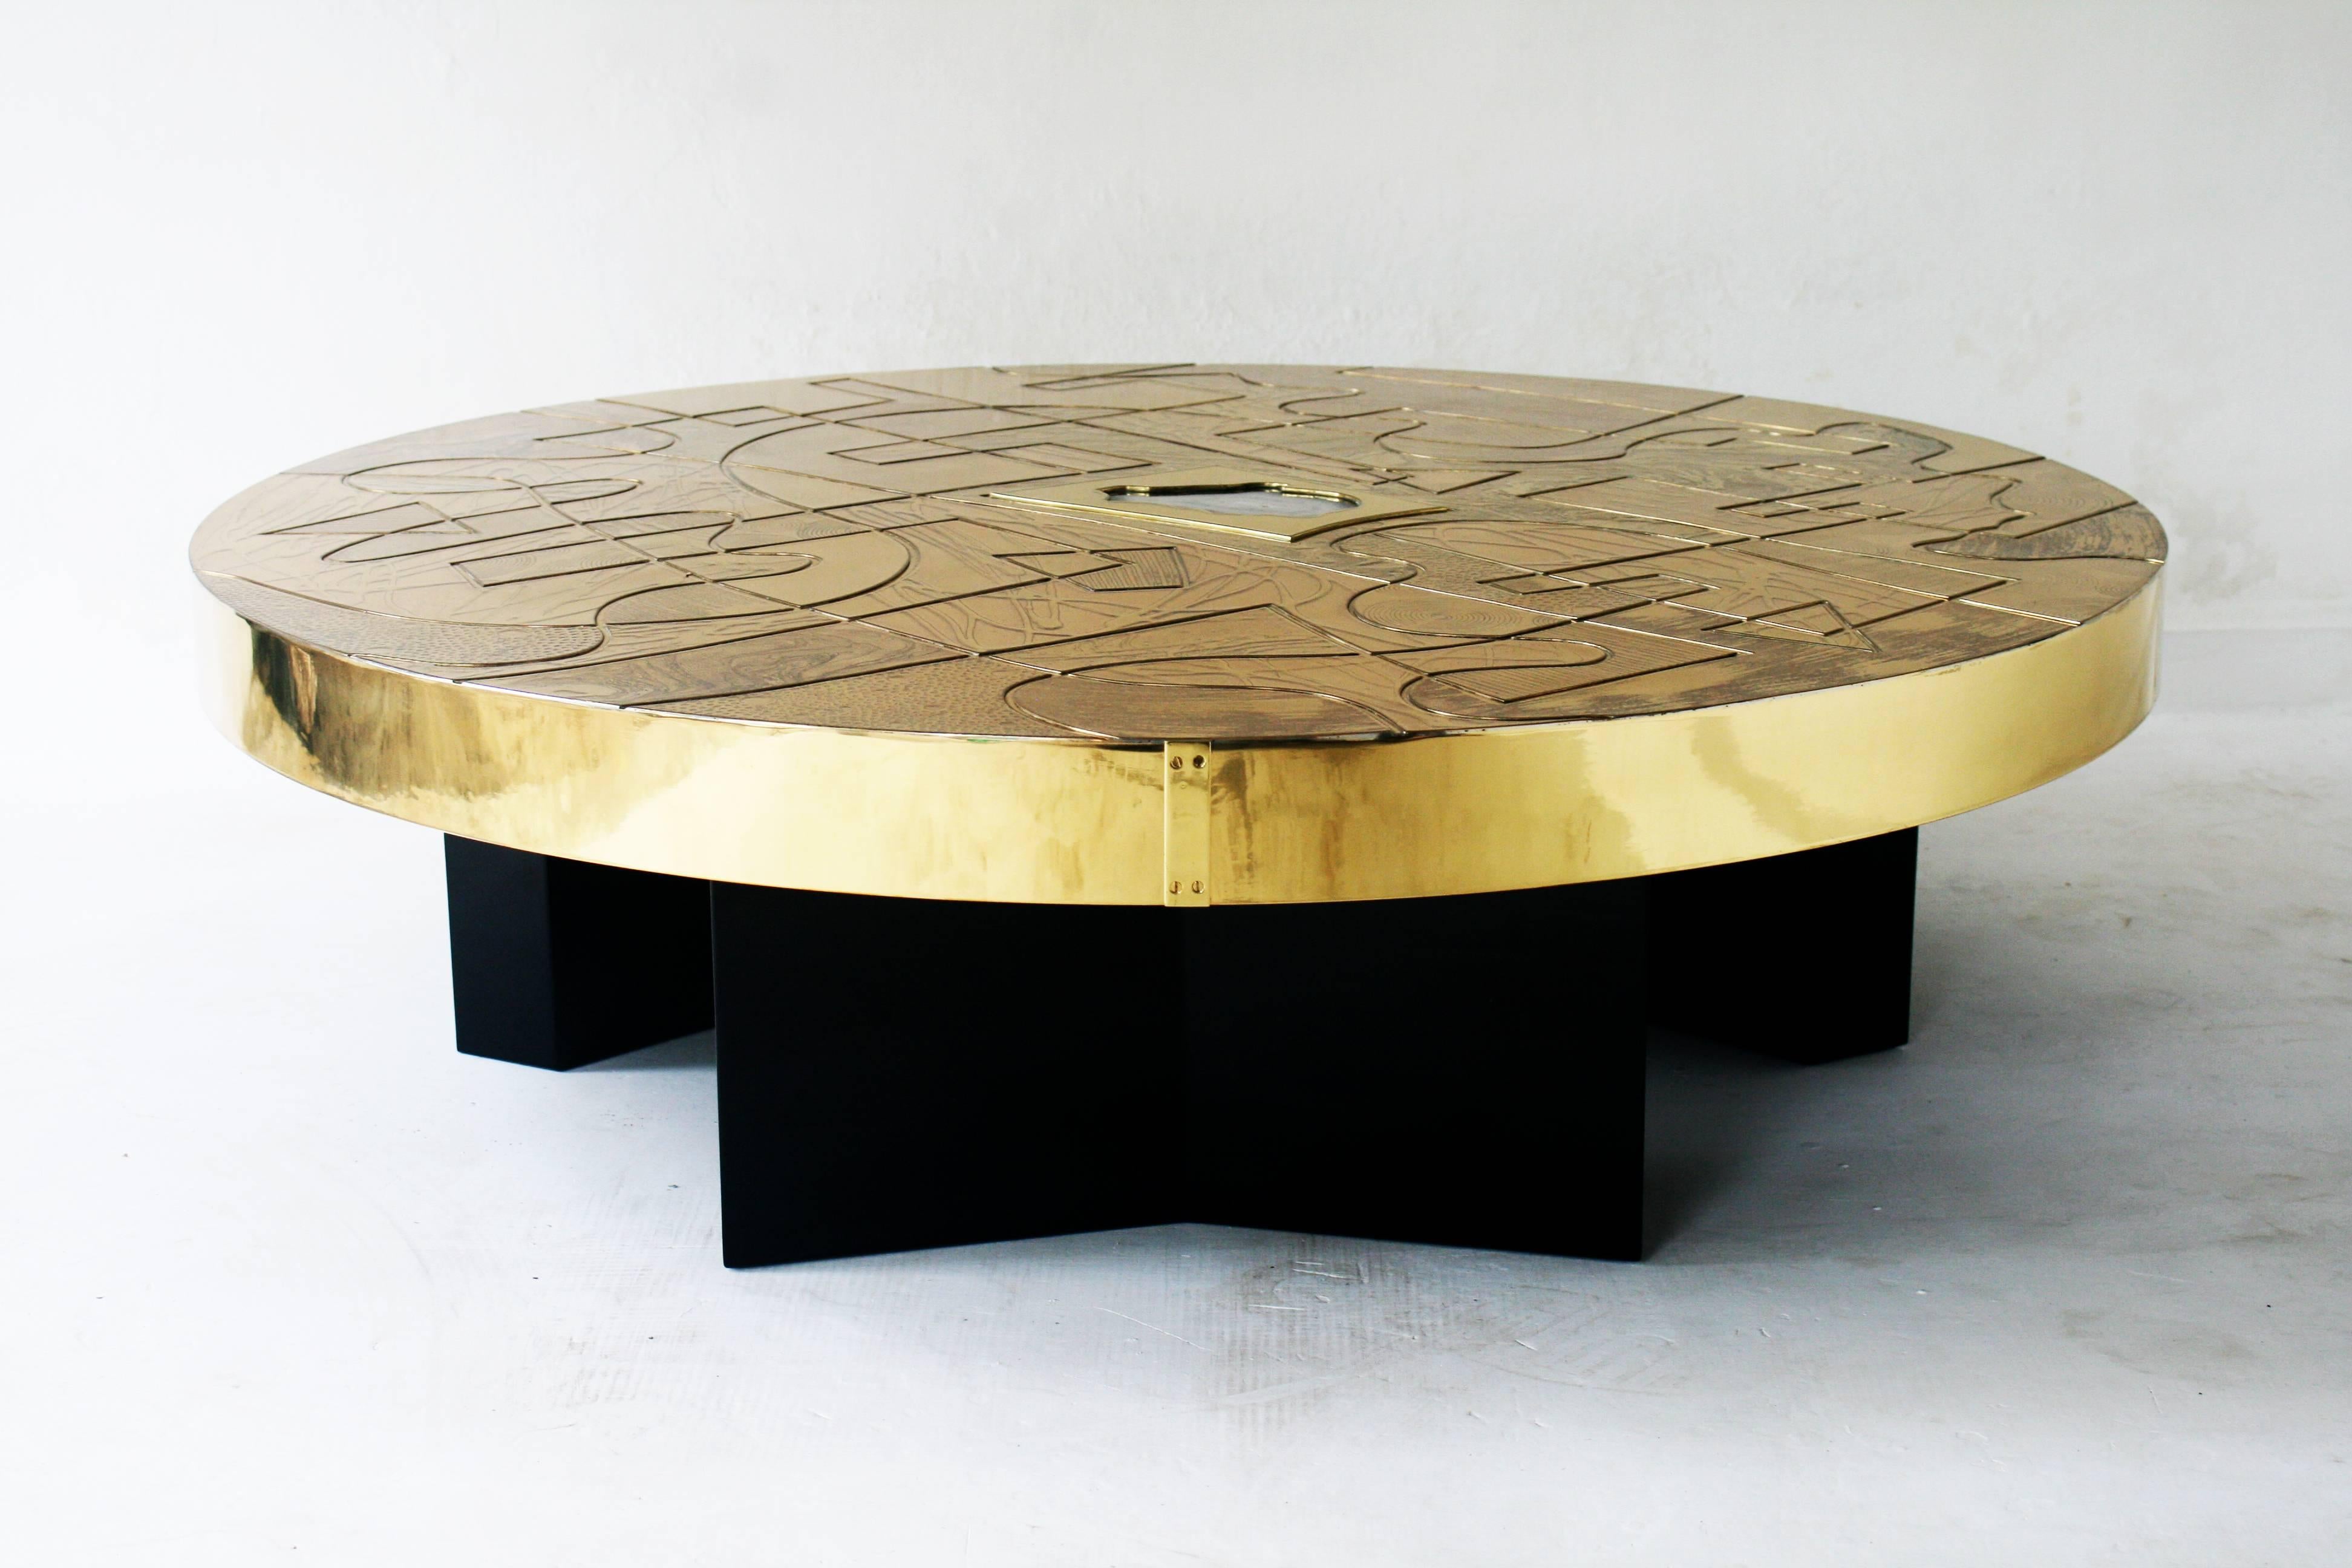 Belgian Belgali Round Coffee Table, Patinated Acid Etched Brass and High End Agate Slice